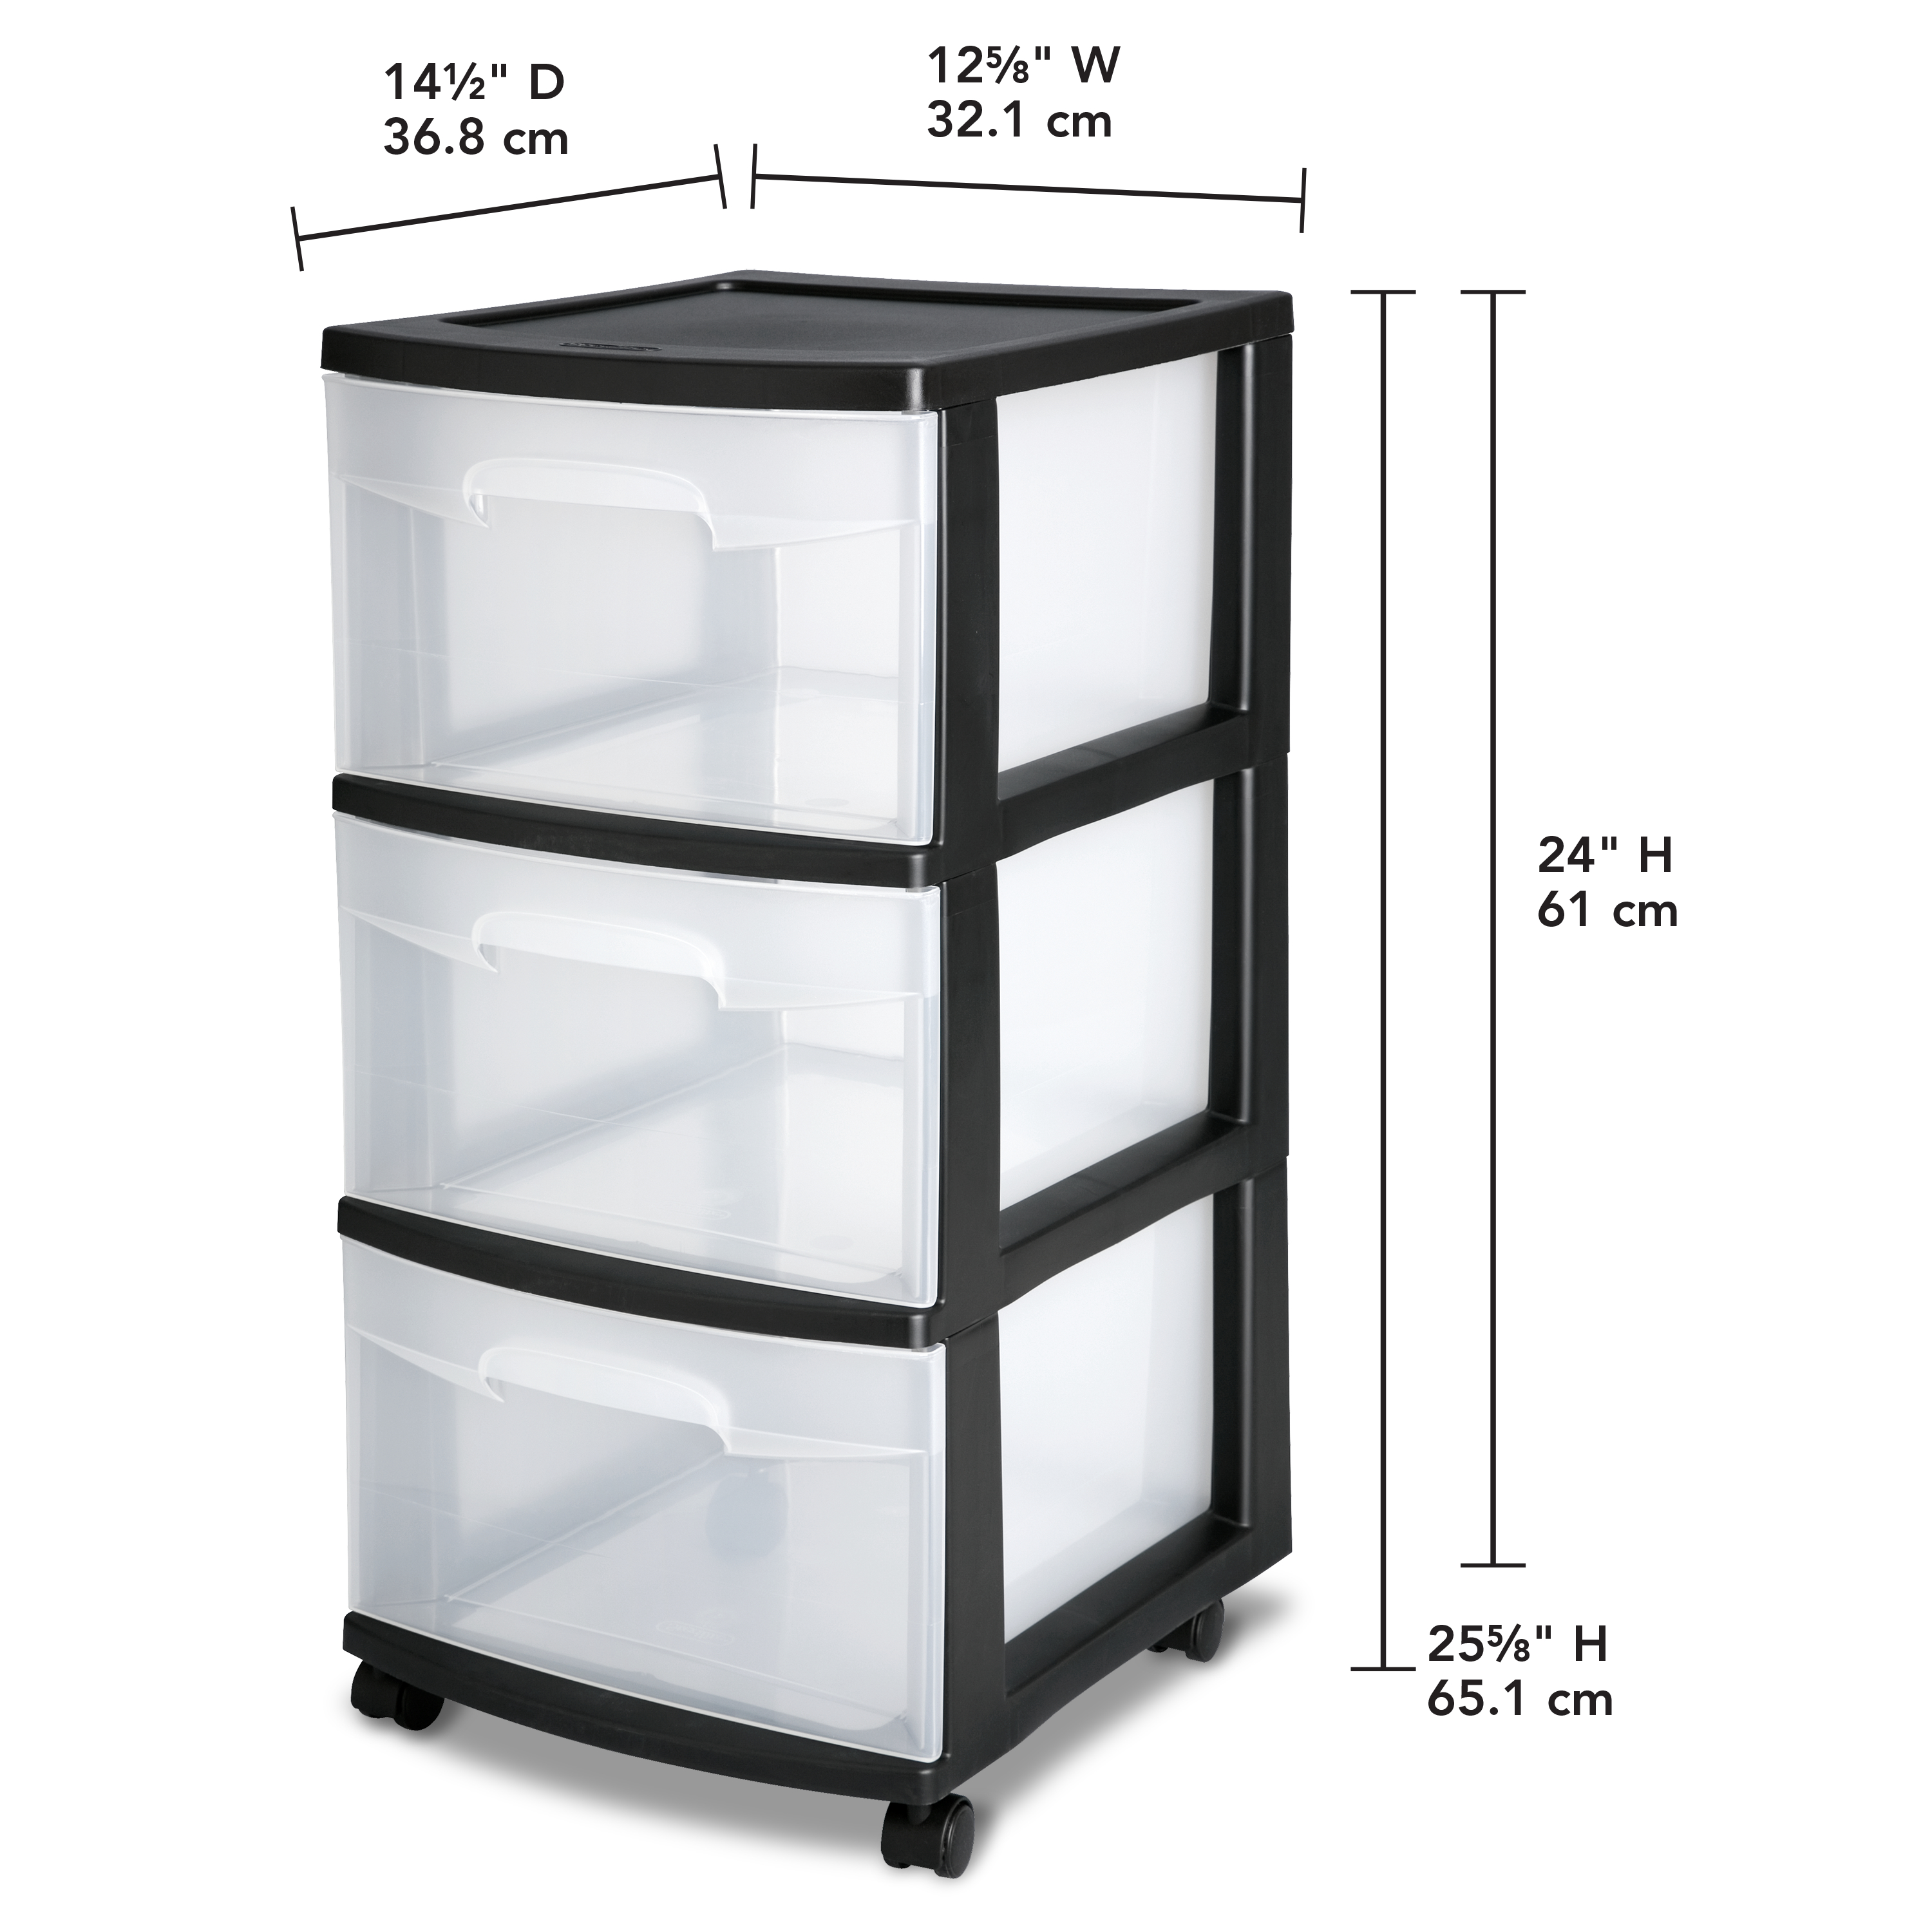 Sterilite 3 Drawer Plastic Cart, Black with Clear Drawers, Adult - image 3 of 8